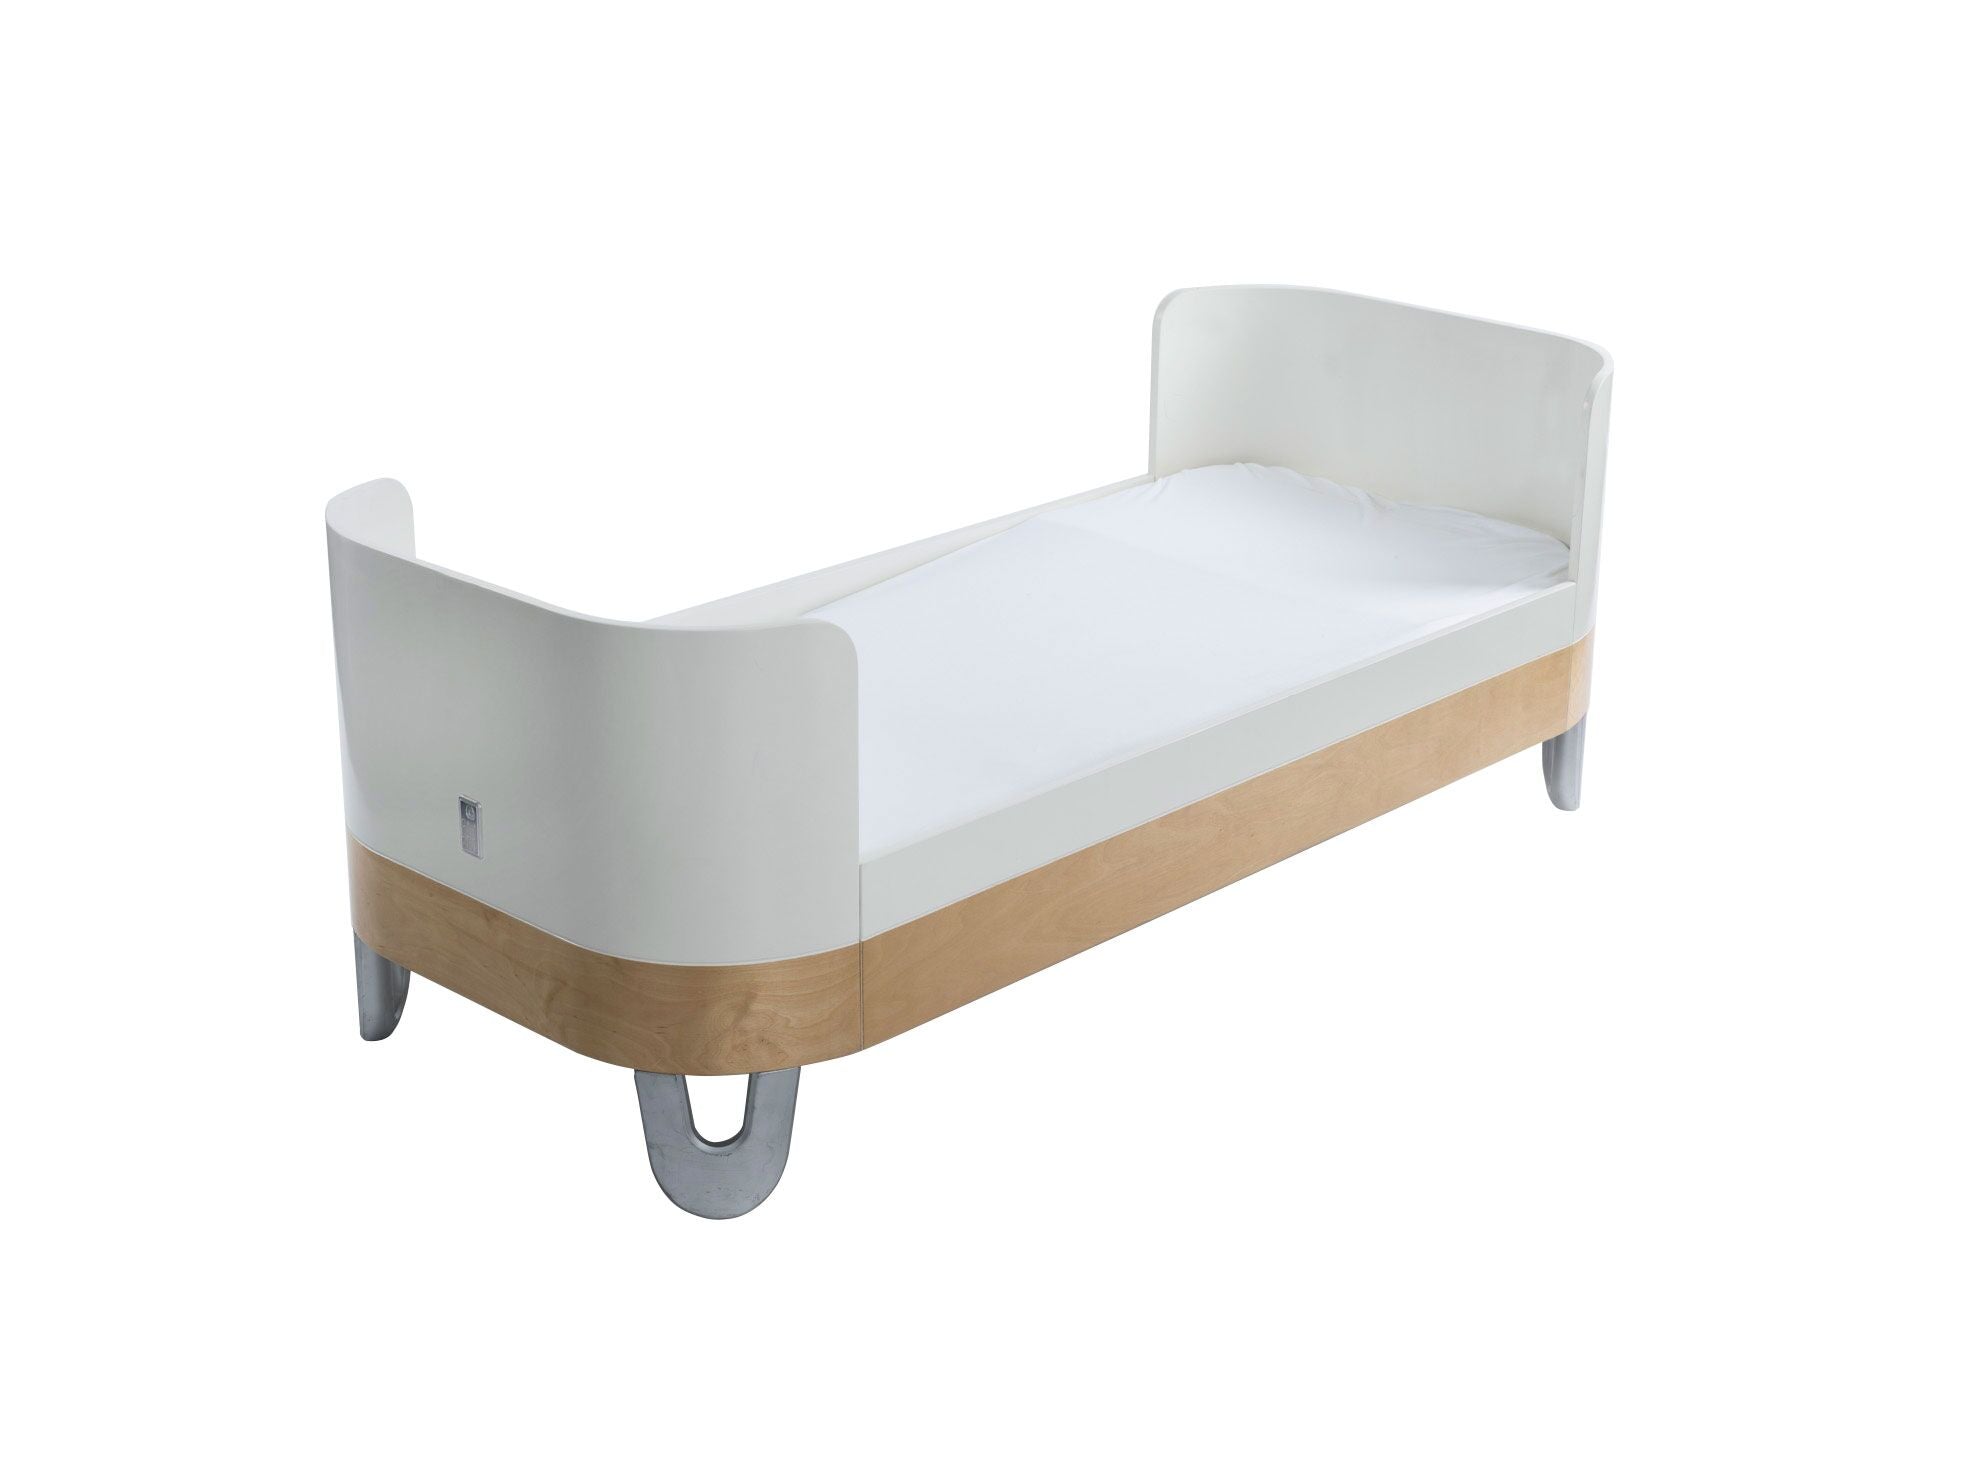 Gaia Baby Serena Junior Bed Extension White/Natural